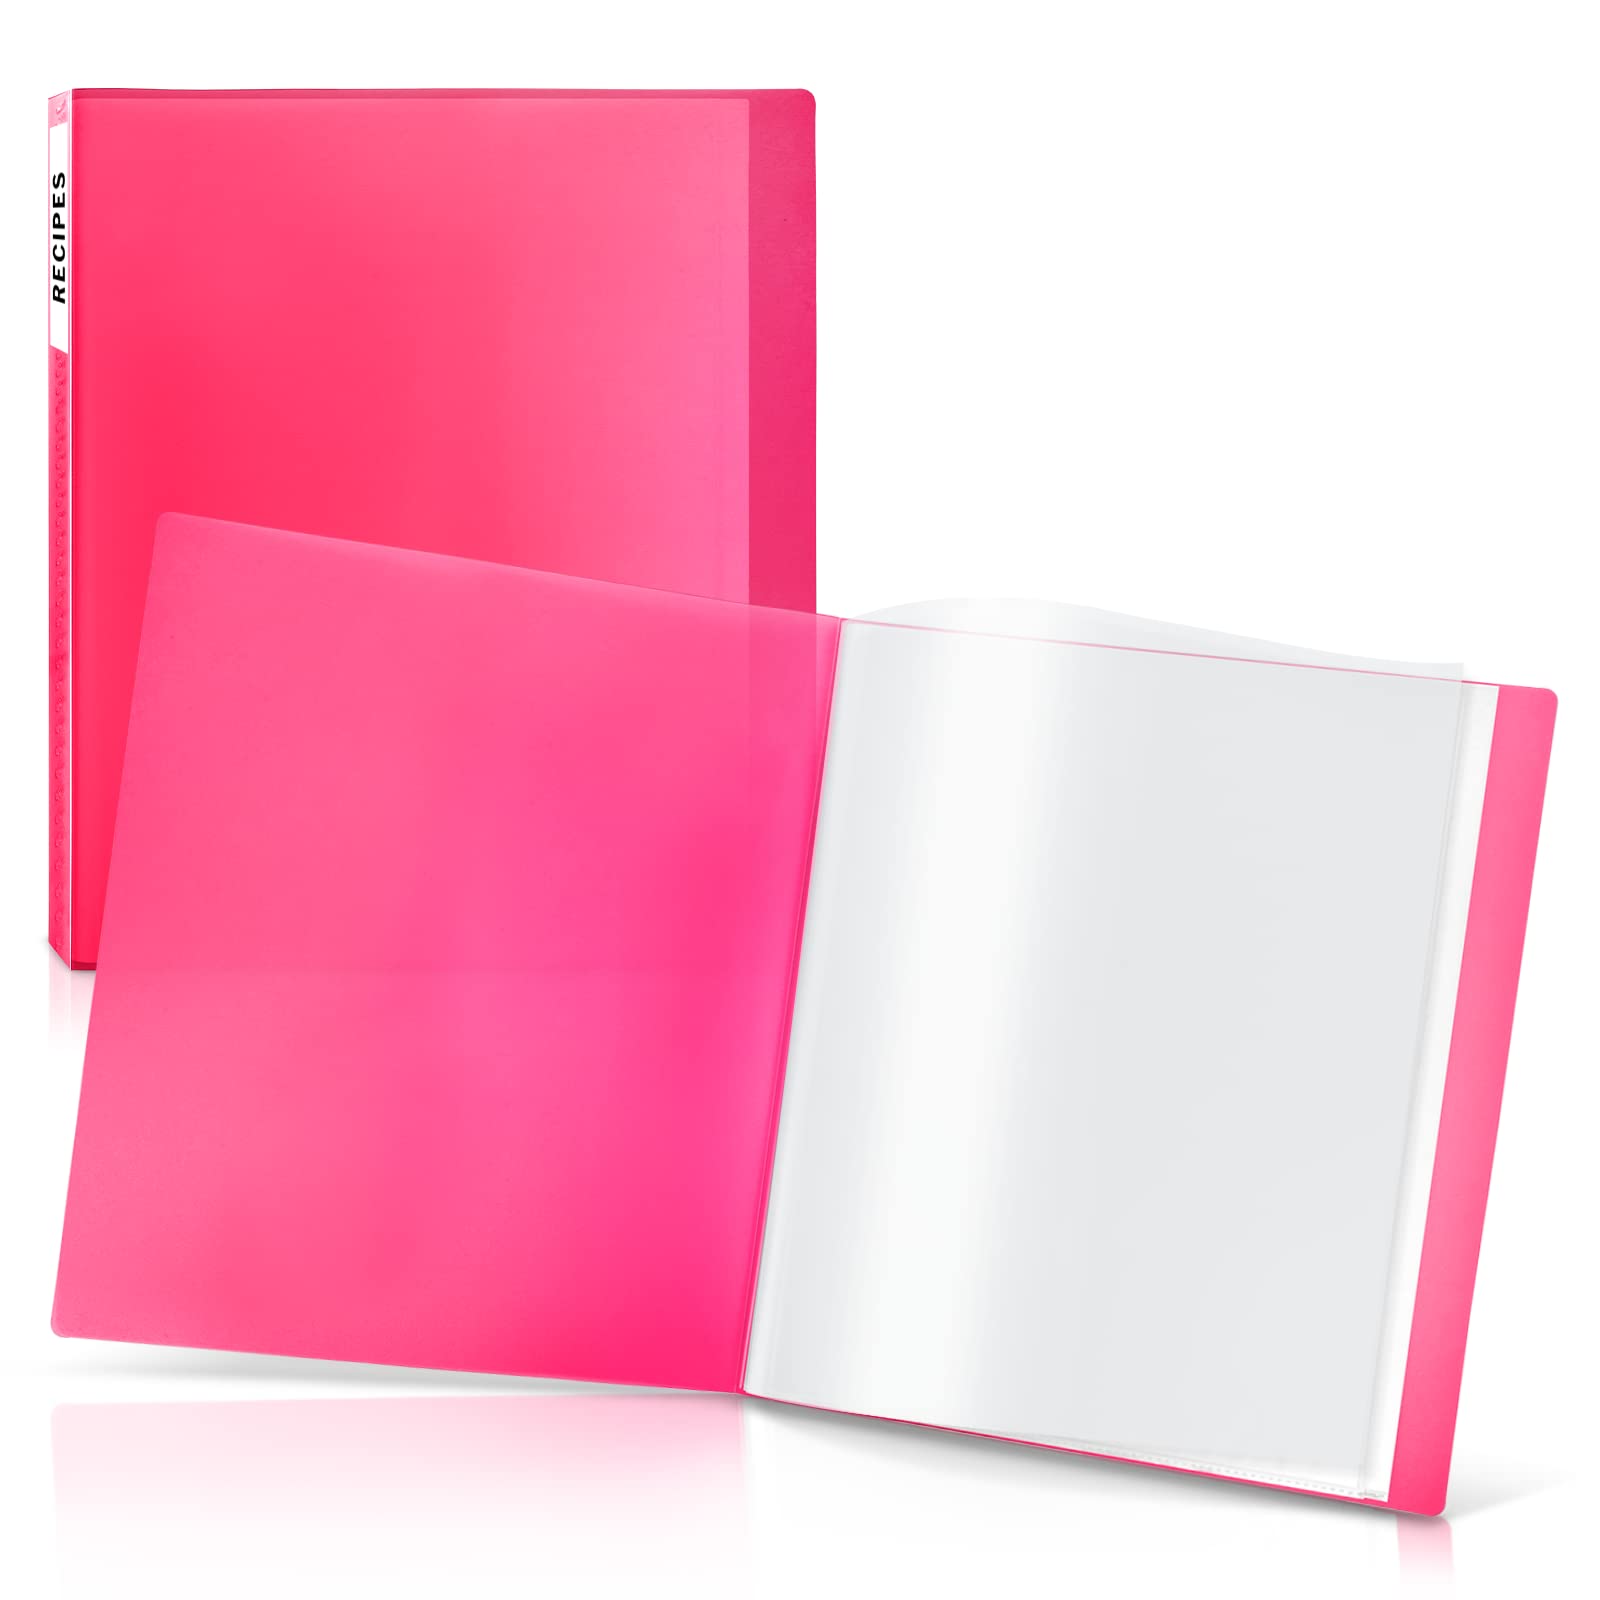 Cranbury Folder With Plastic Sleeves (Pink) - 85X11 Presentation Book With See-Through Cover And 24 Clear Sheet Protectors - 48